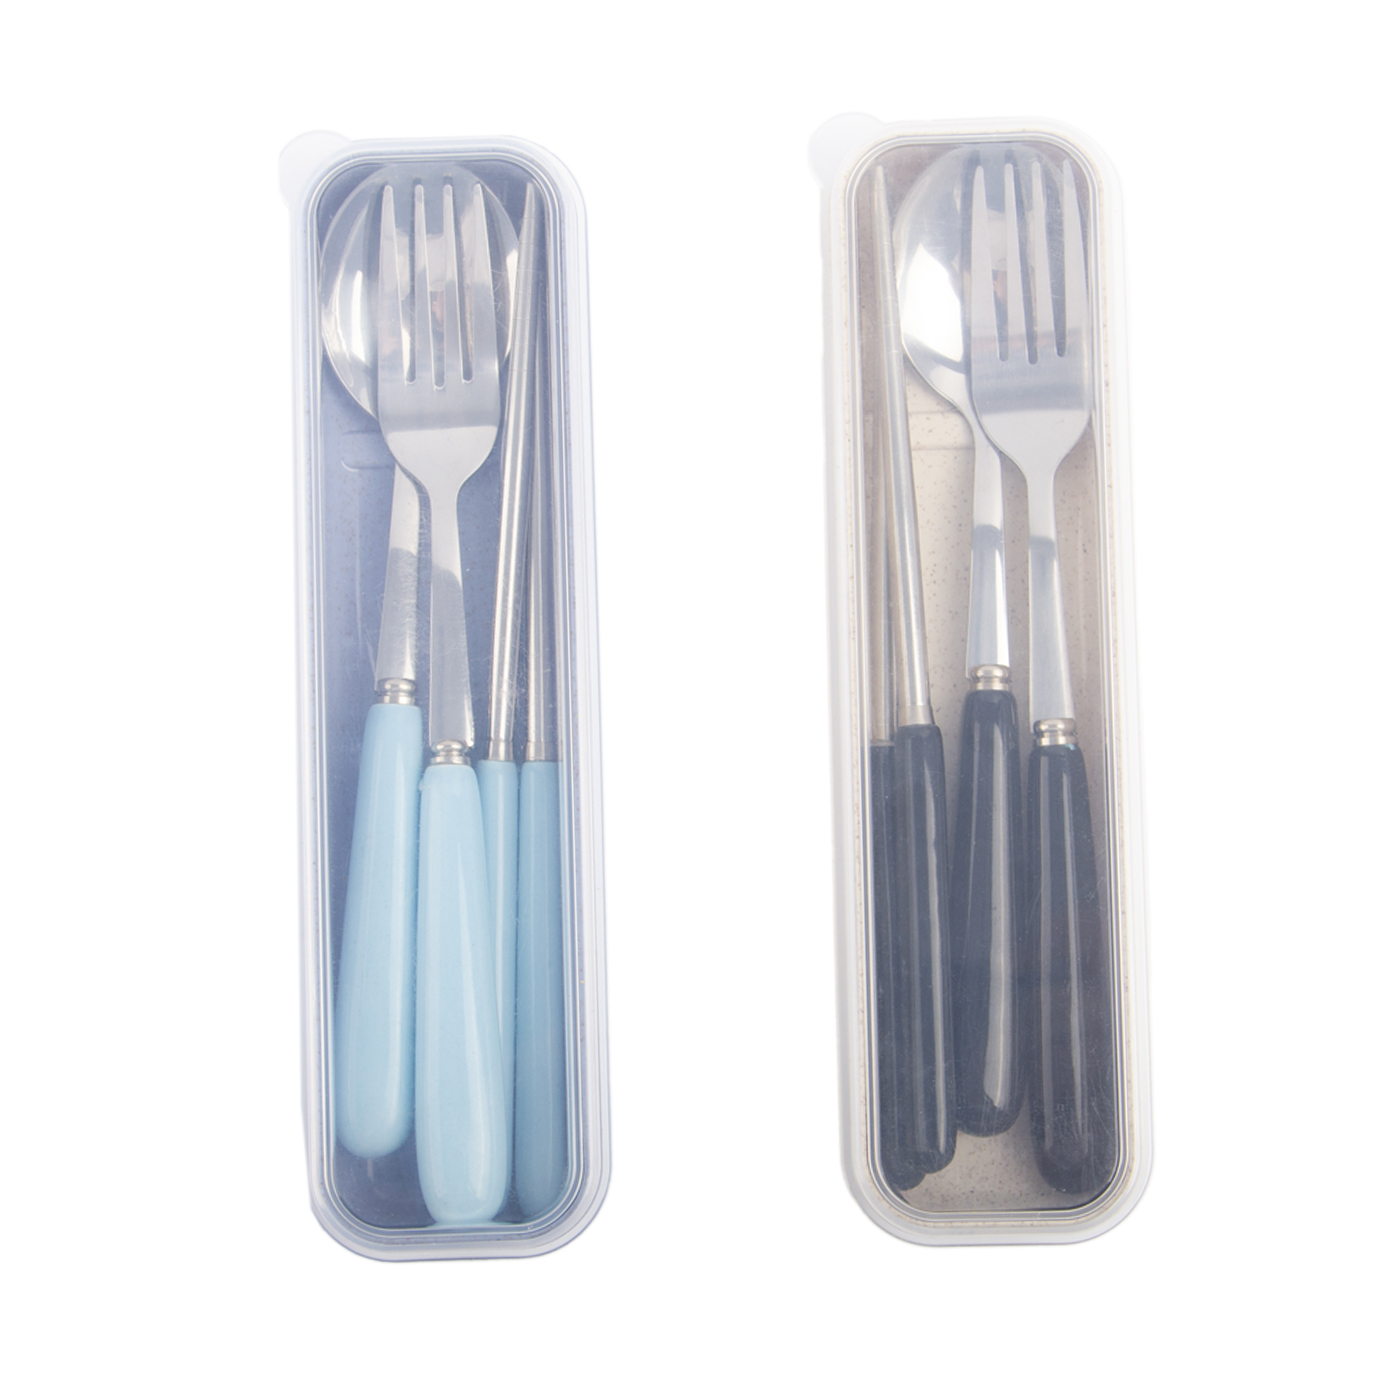 3 Pcs Stainless Steel Cutlery Set With Travel Case3